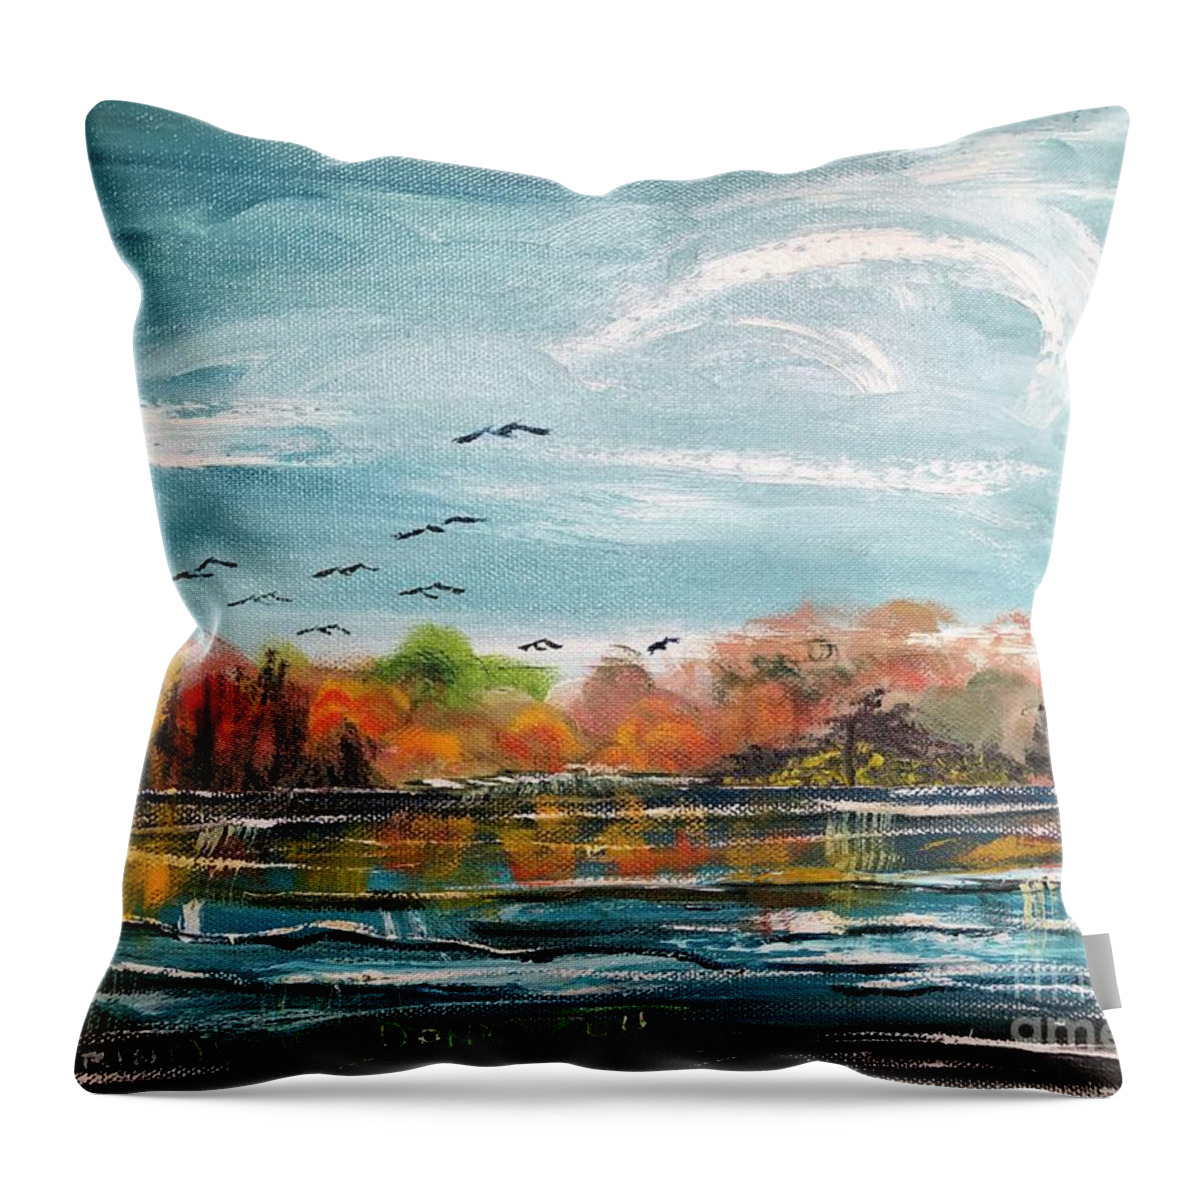 Mountain Throw Pillow featuring the painting Blue Ridge Mountain Lake -- Falling for You by Catherine Ludwig Donleycott